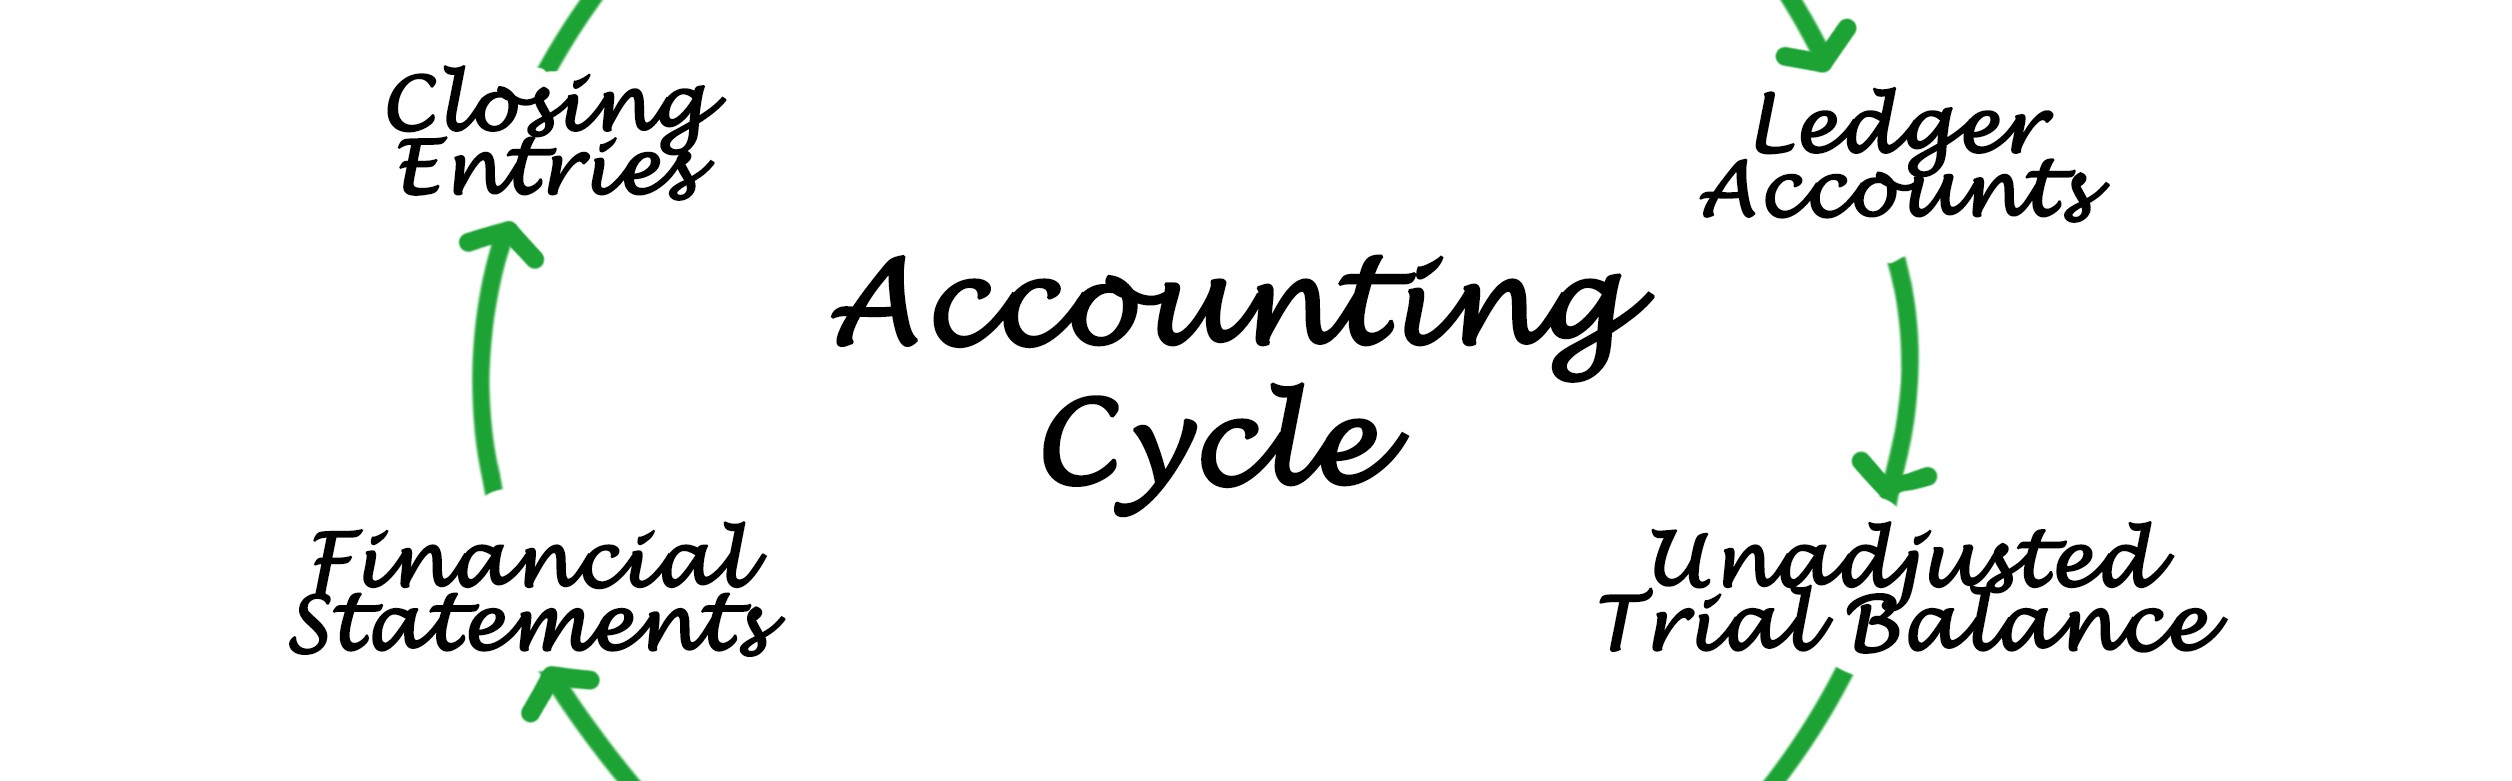 accountingcycle1croppedimage.jpg